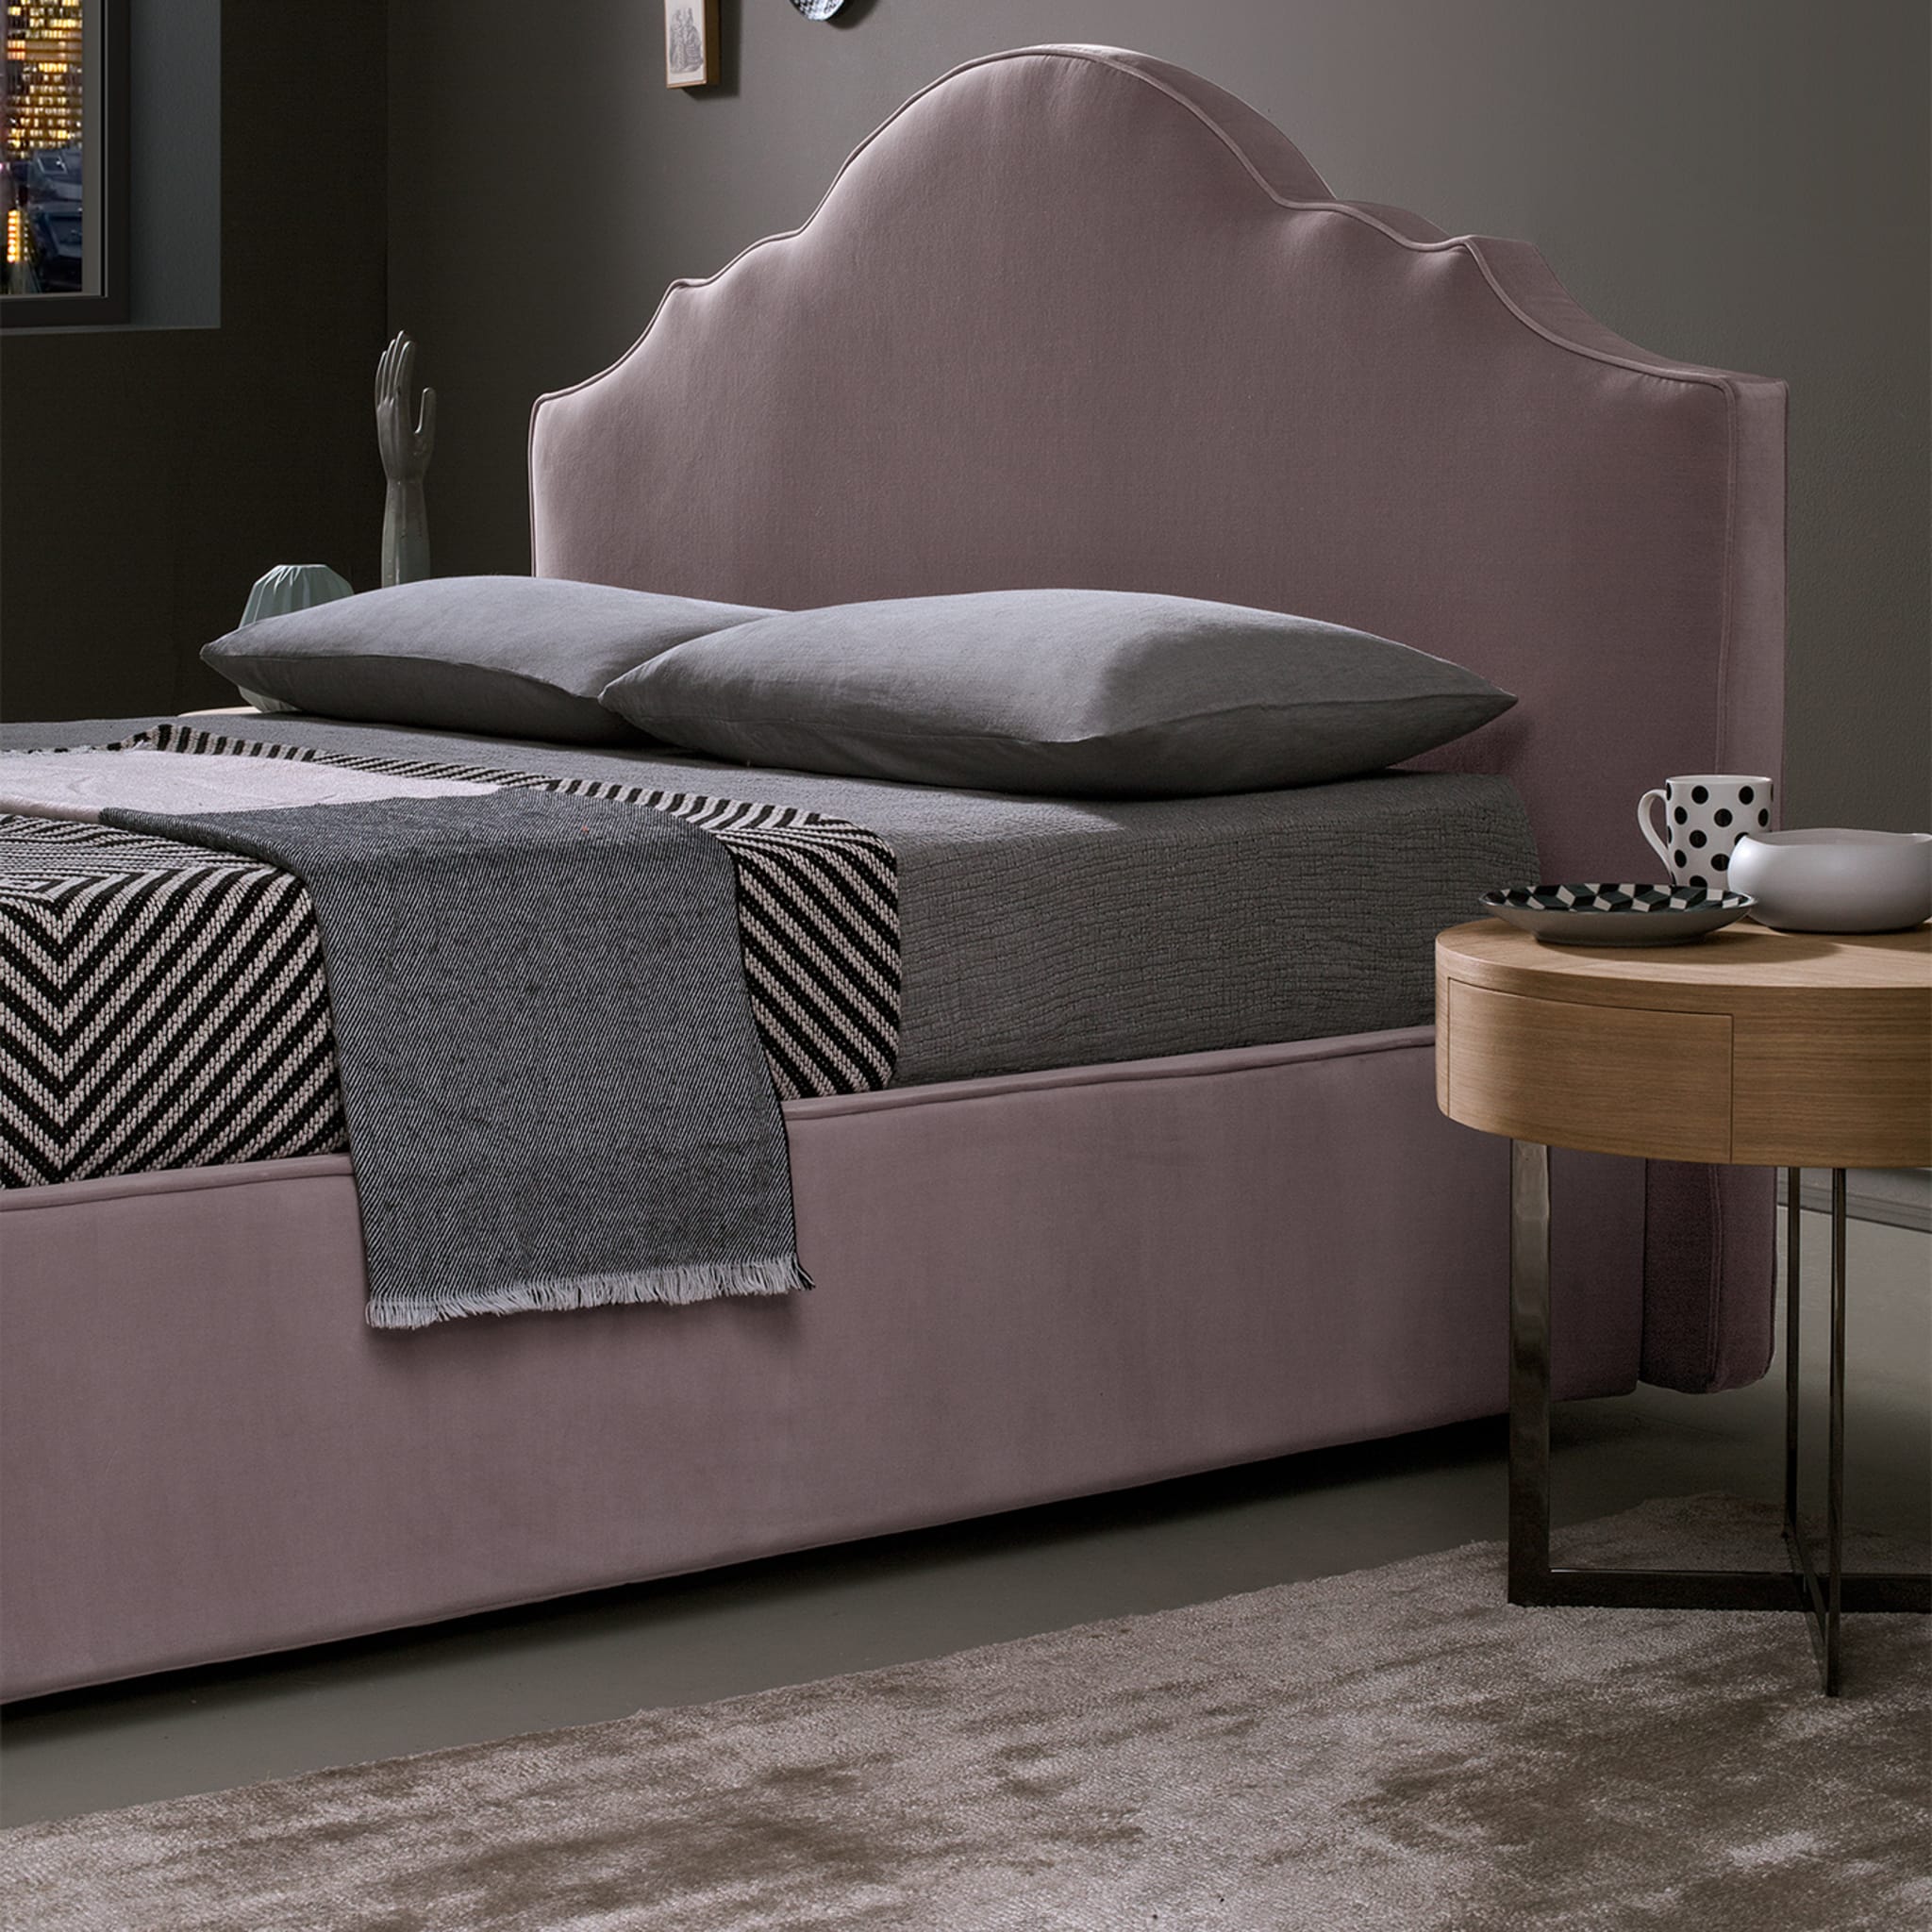 Tiffany Taupe Double Bed - Alternative view 1